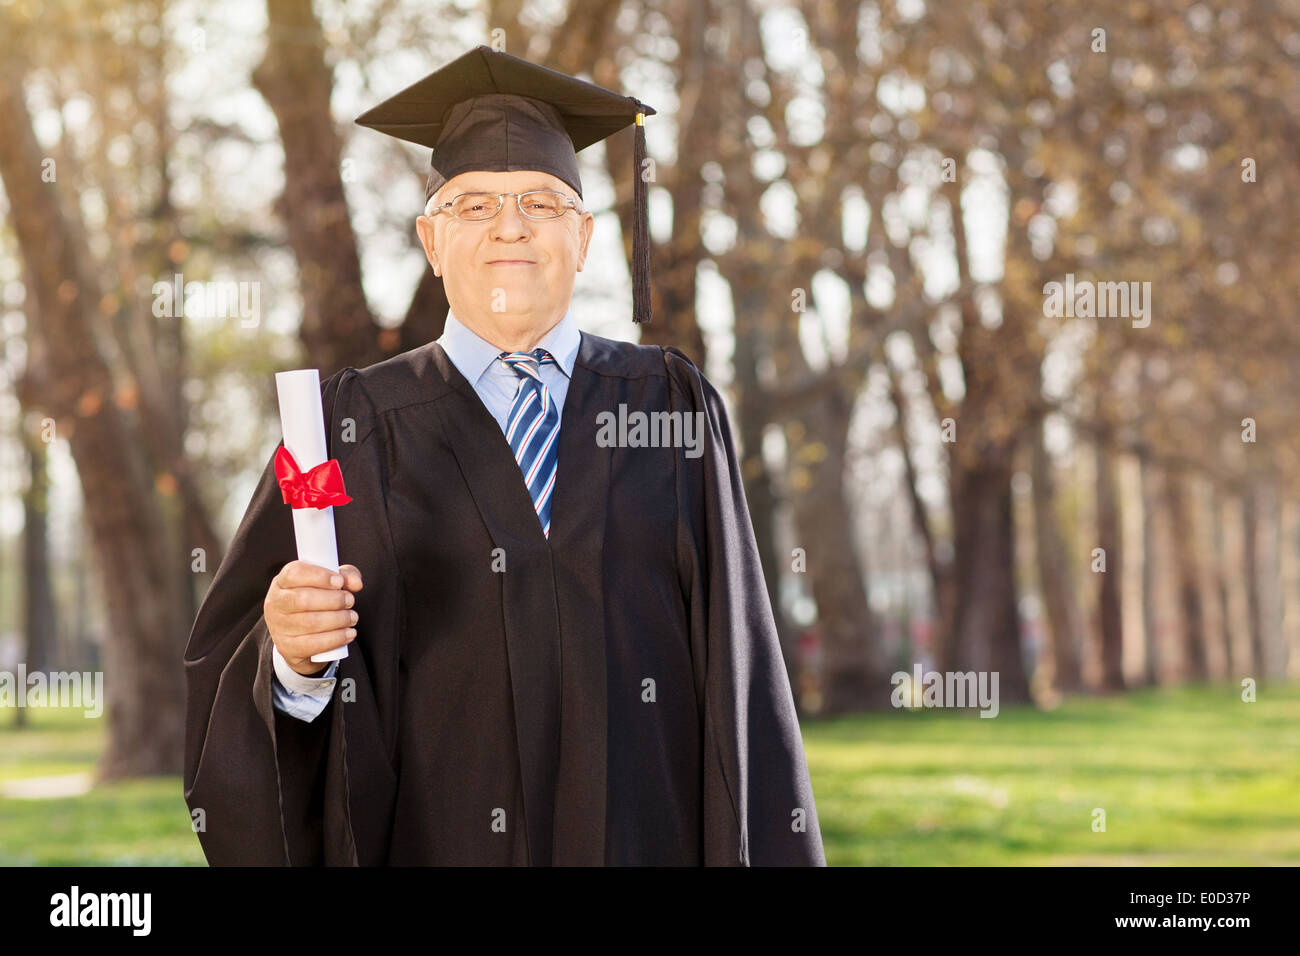 Mature college graduate holding a diploma in park Stock Photo